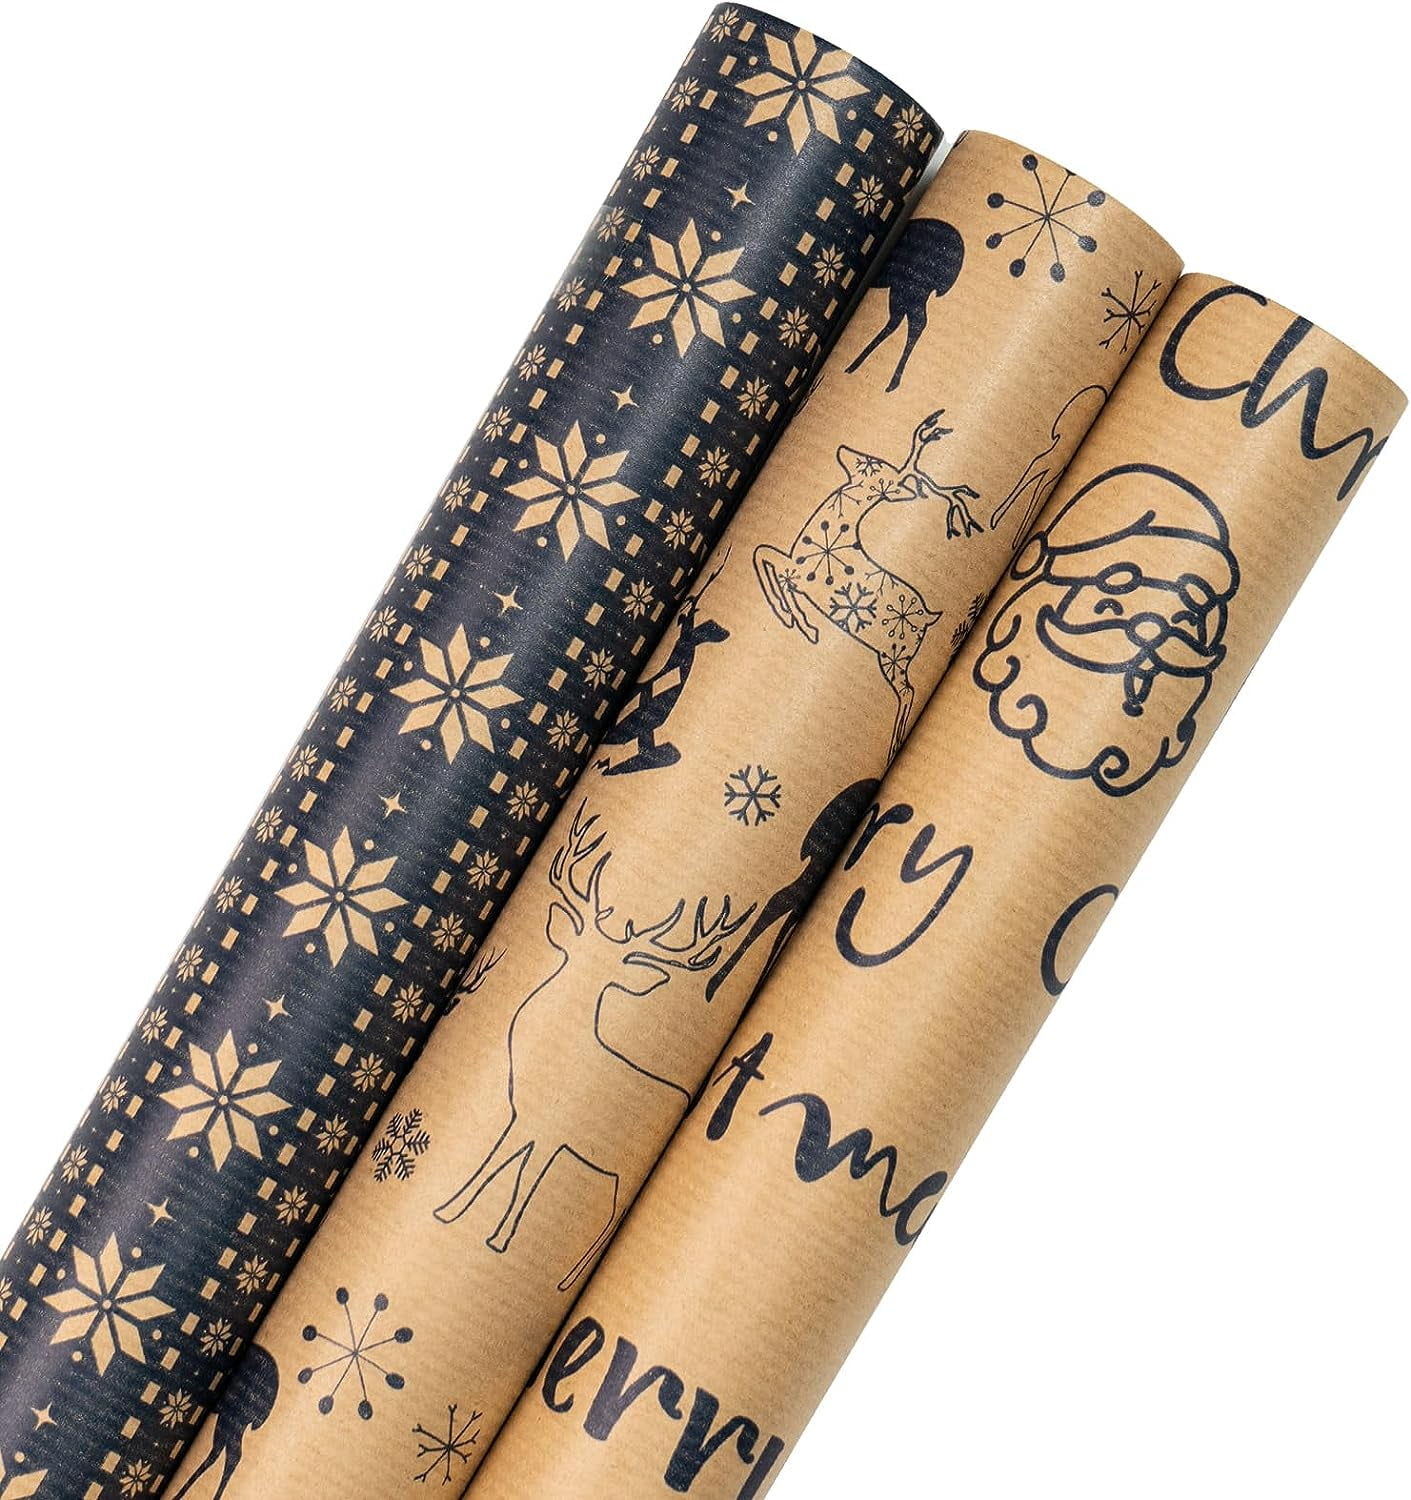  RUSPEPA Kraft Christmas Wrapping Paper Roll - Mini Roll - Black  Reindeer Design for Holiday Gift Wrap - 17 Inches X 32.8 Feet : Health &  Household